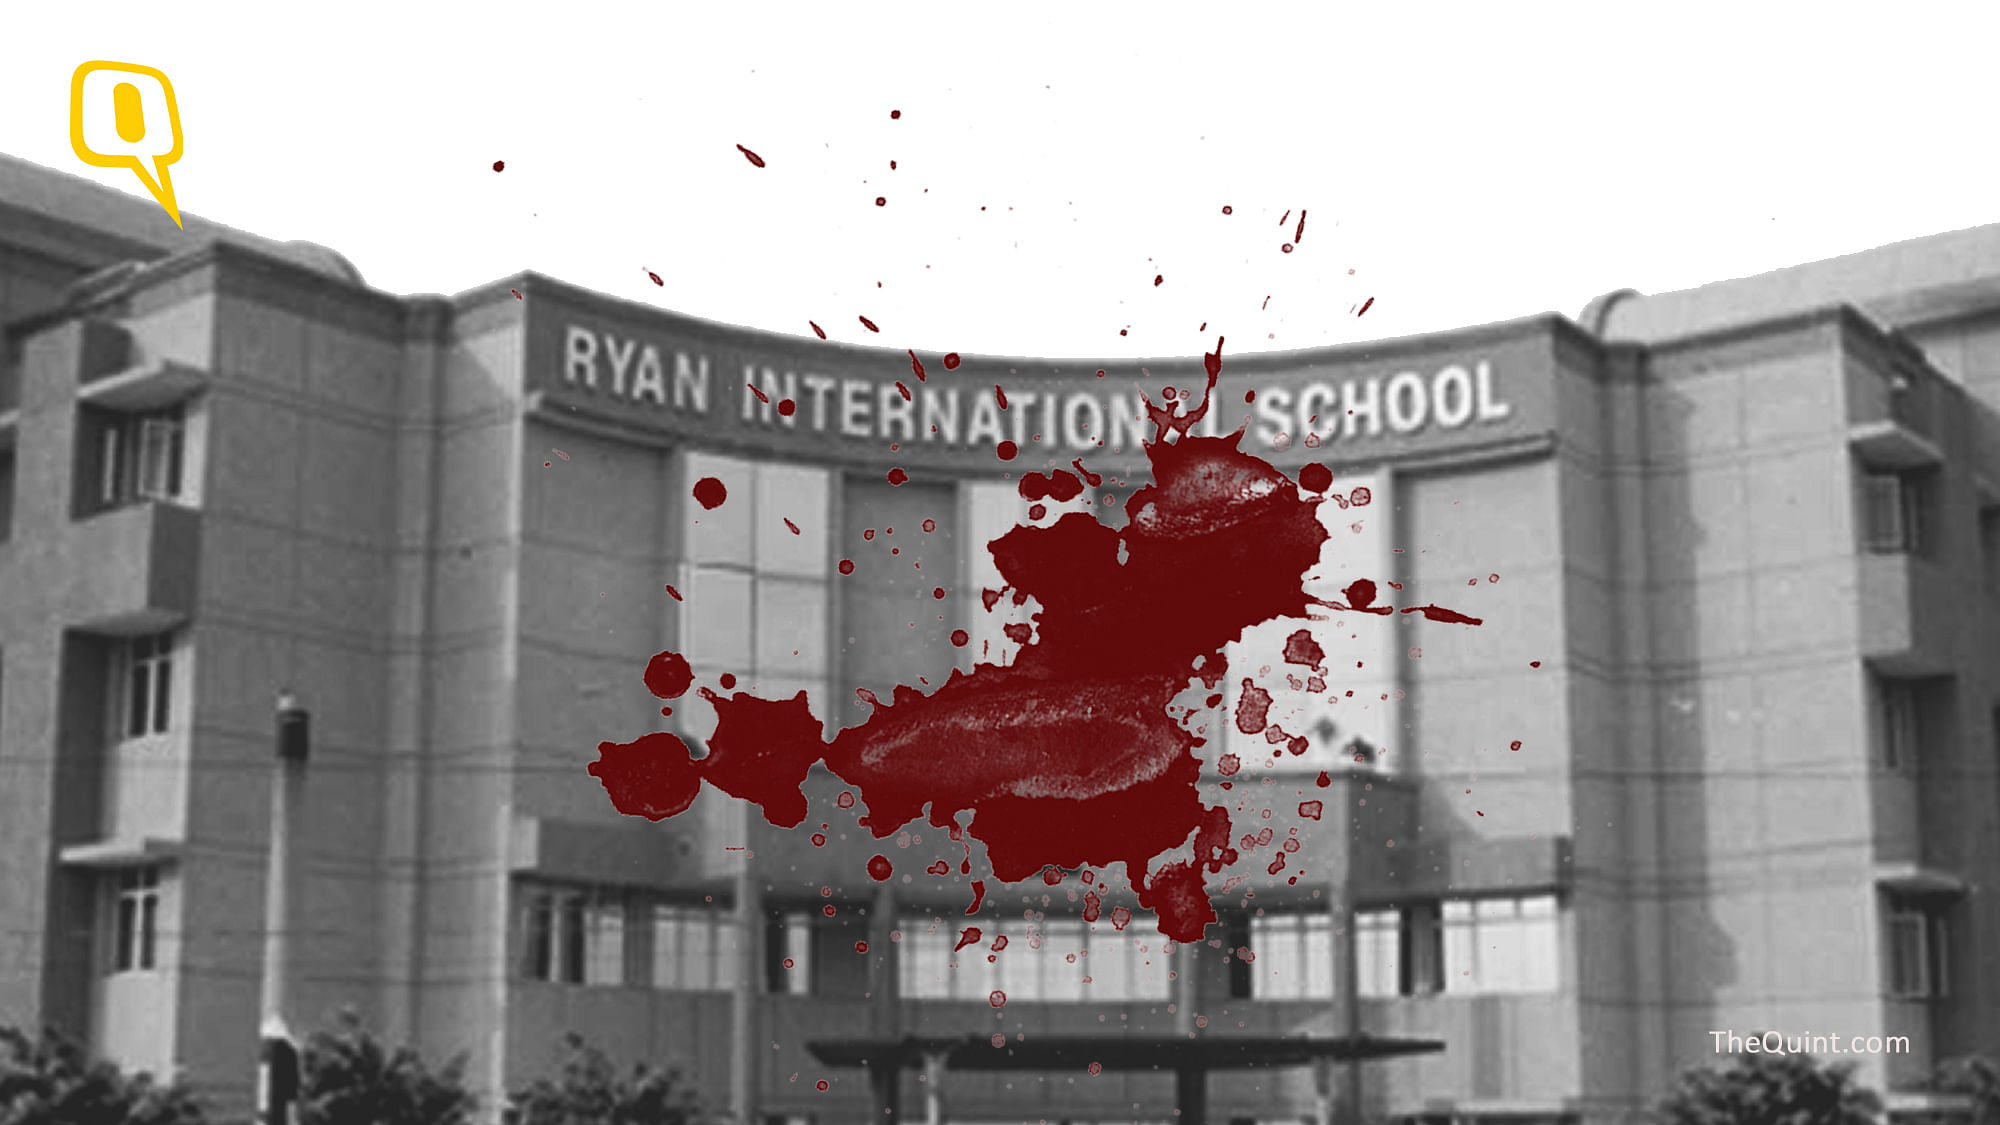 Ryan International School has been in the news after the murder of a class 2 student in its Gurugram branch.&nbsp;